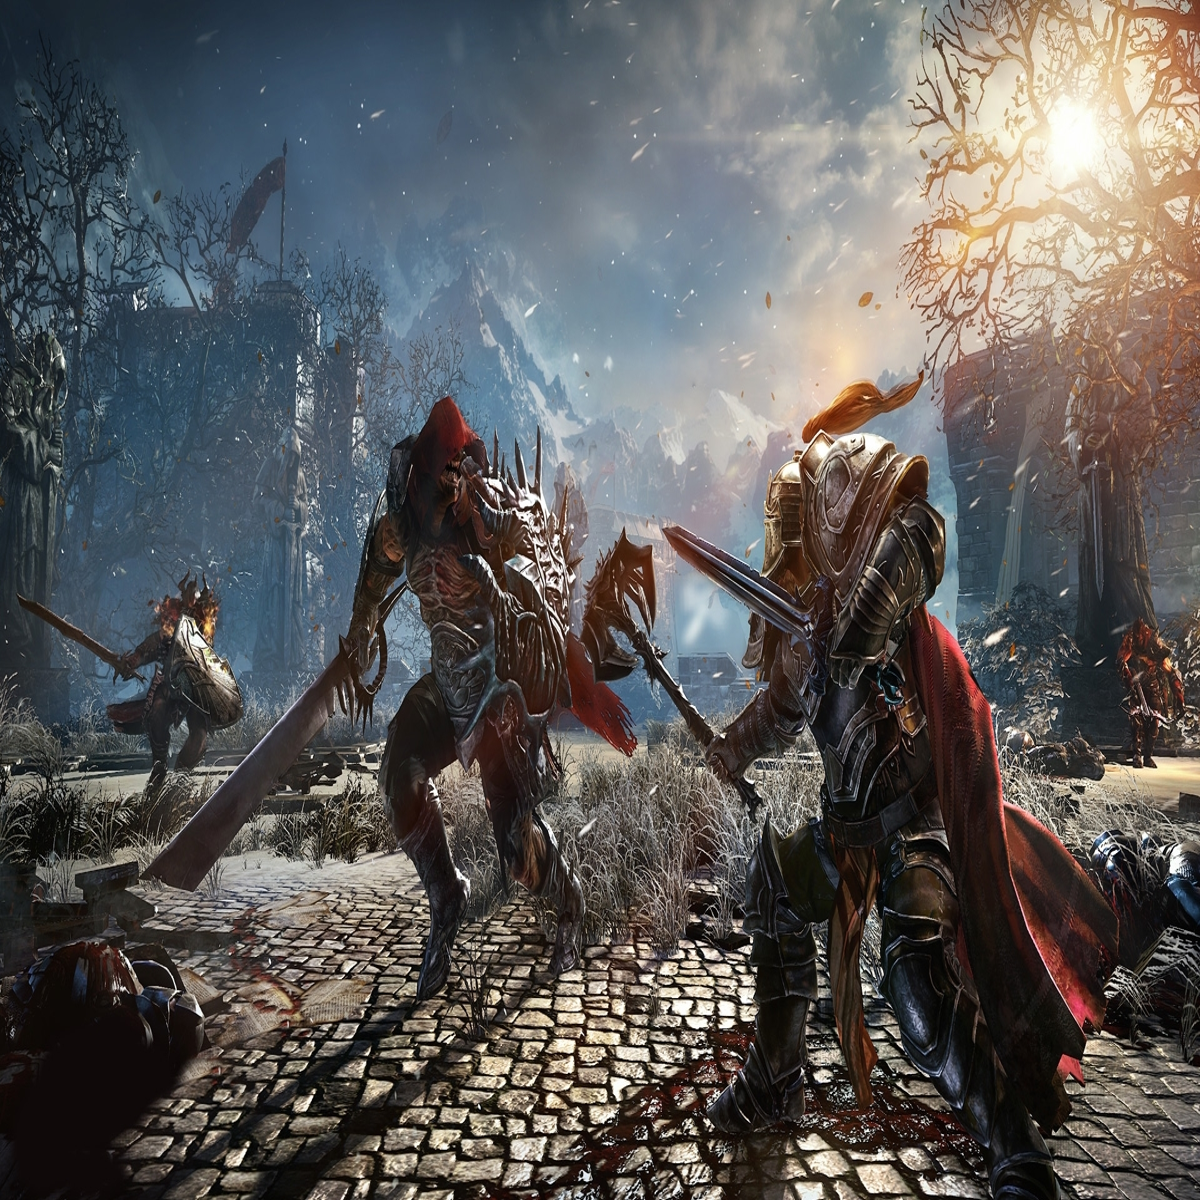 Lords of the Fallen Review (PS5)